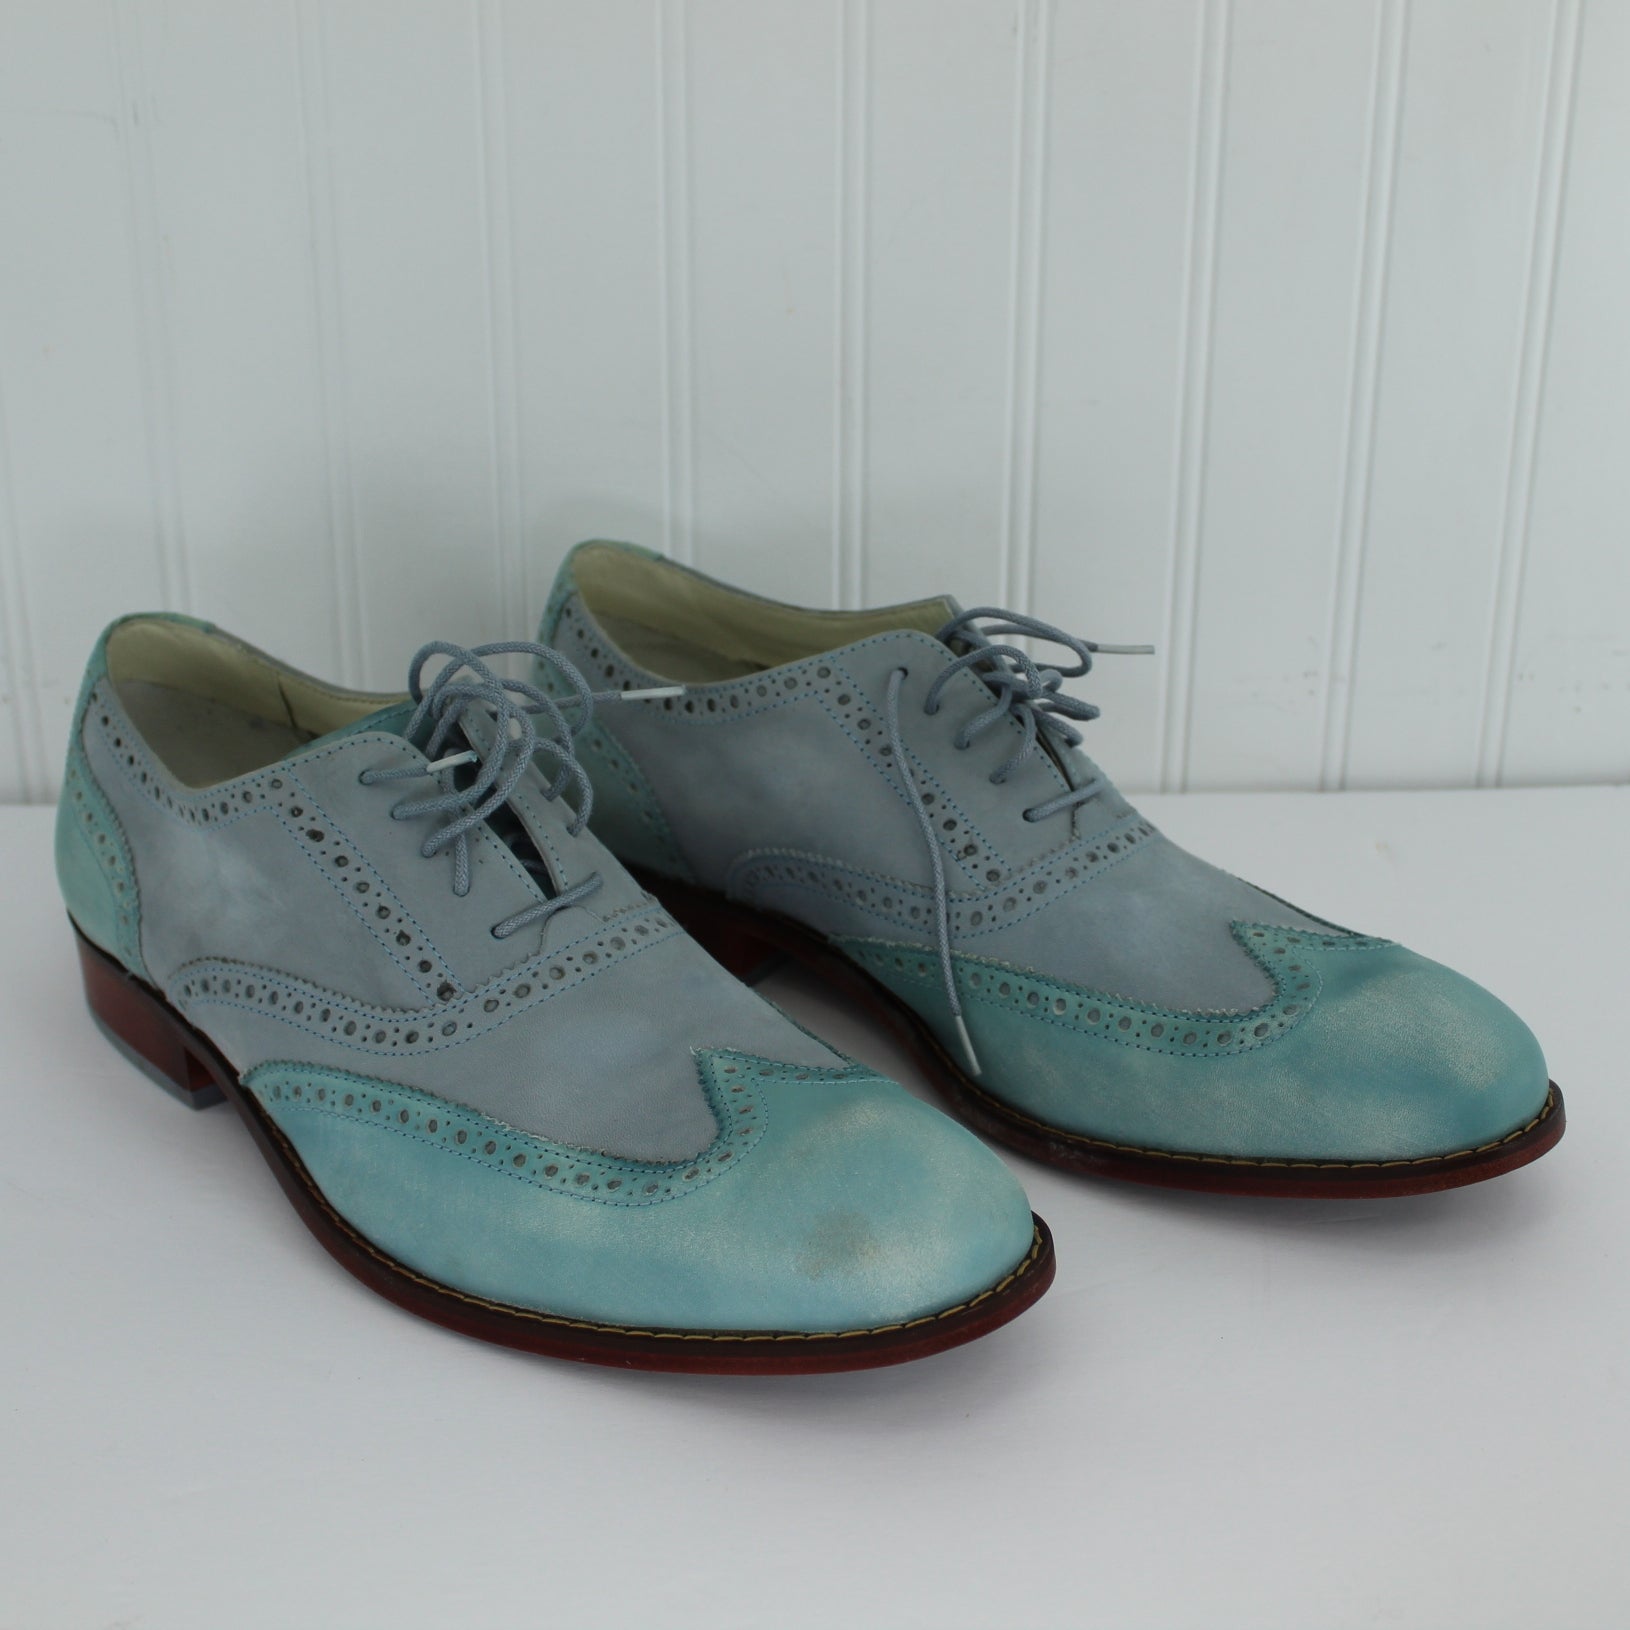 Cole Haan Nike Air Mens Saddle Shoes New in Box Cool Shades of Blue 11M blue clouds look Nubuck leather